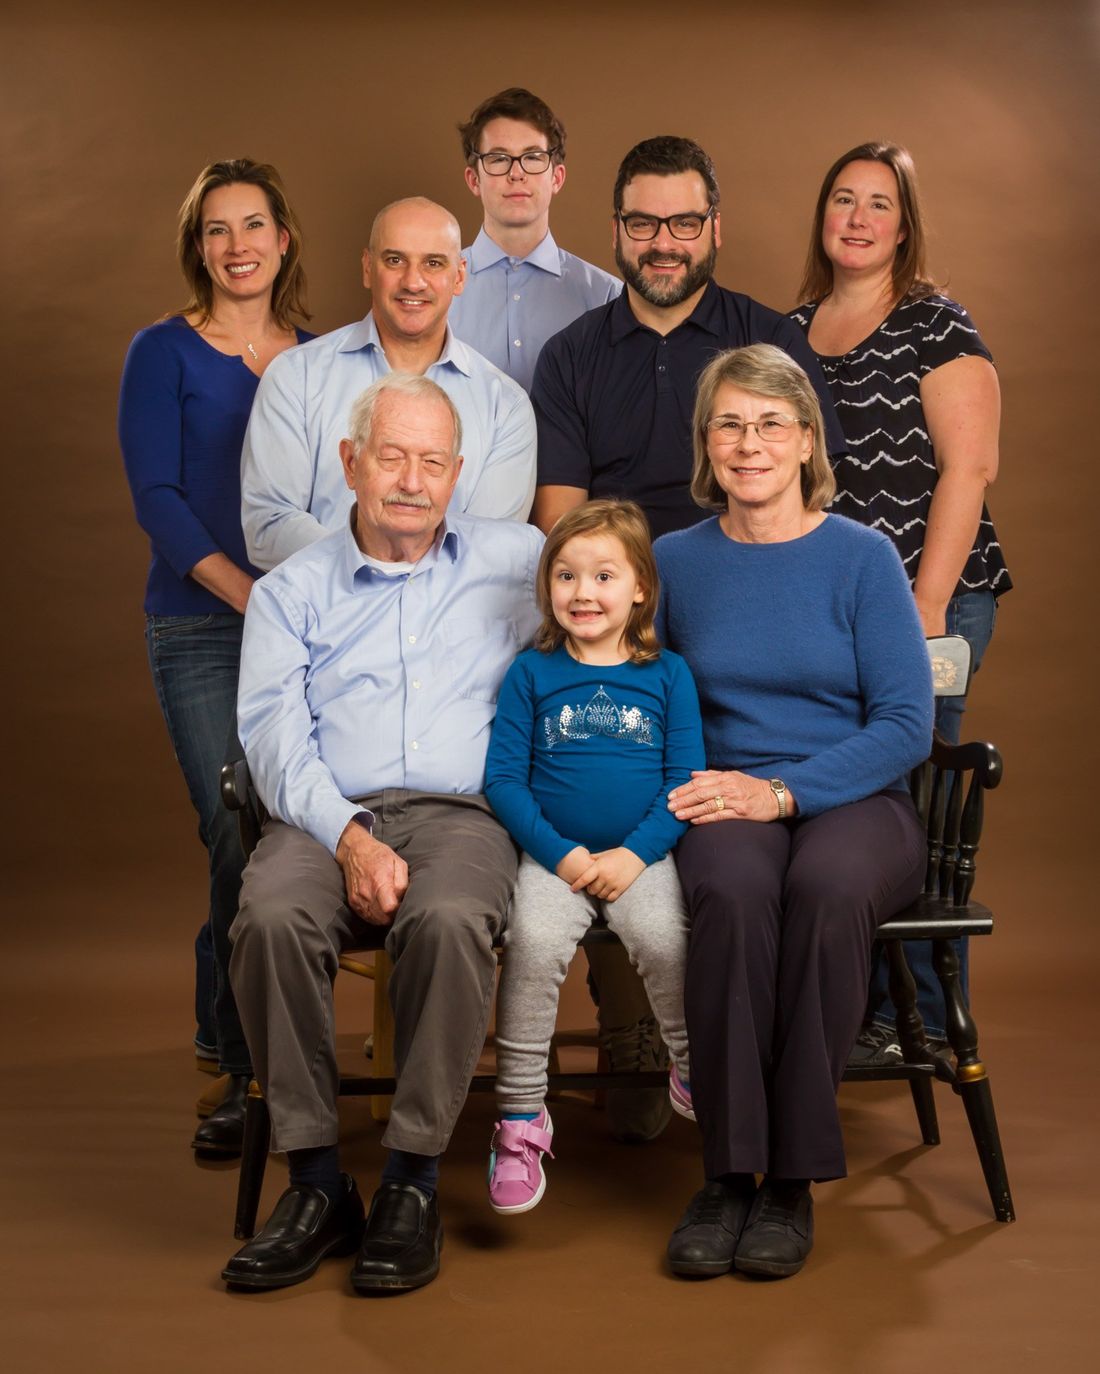 A studio portrait of a large family, grandparents, parents and children with a brown background